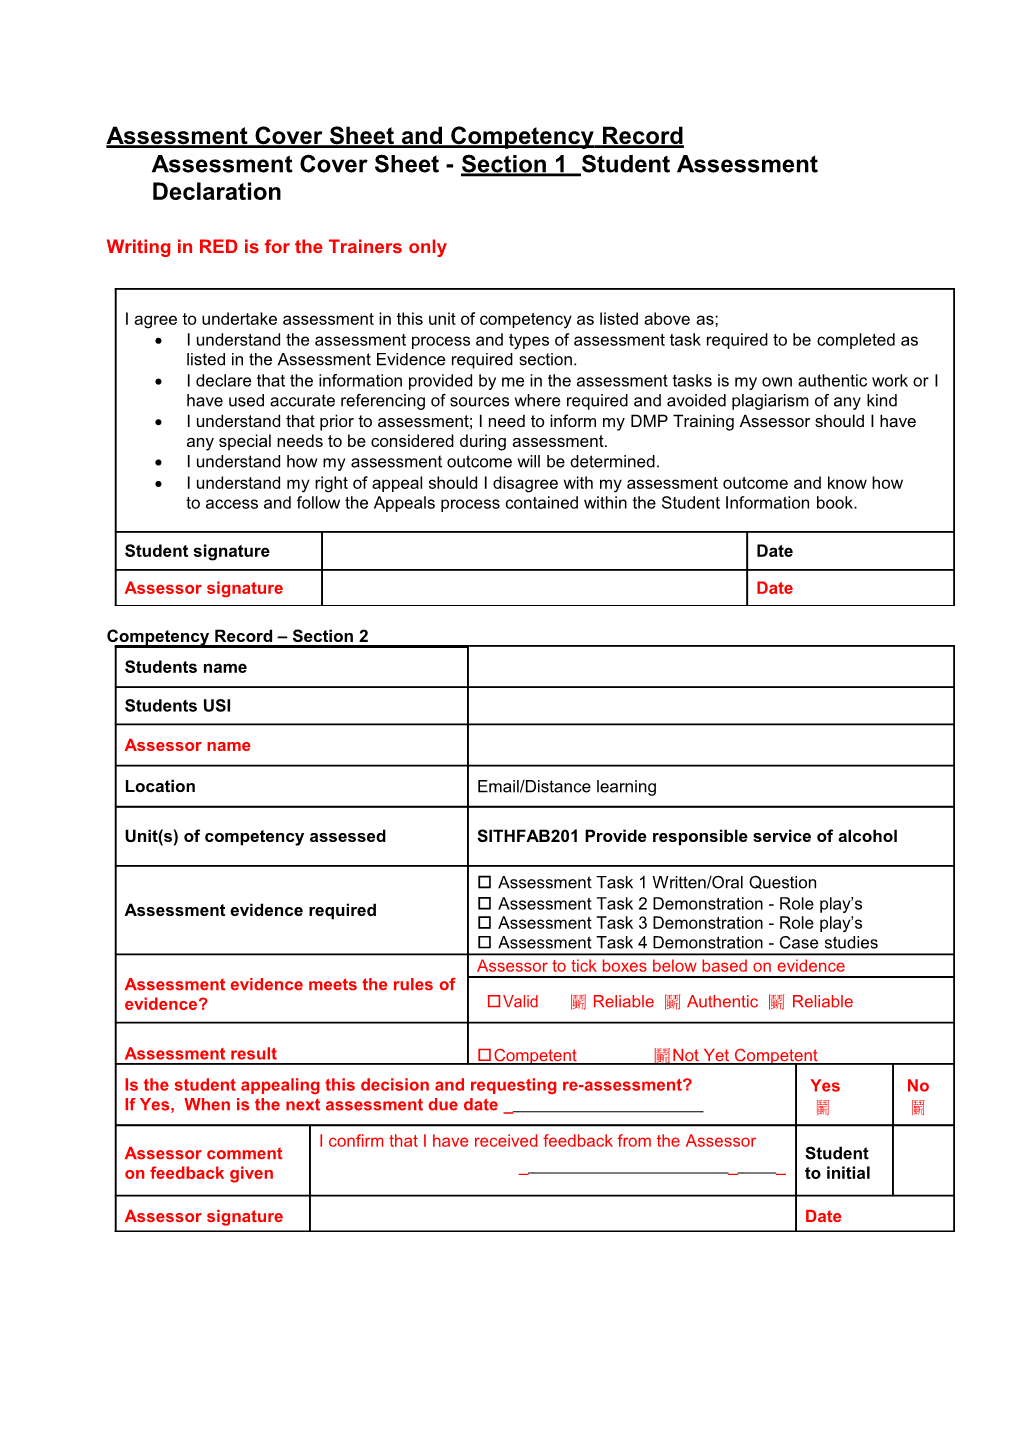 Assessment Cover Sheet and Competency Record s1